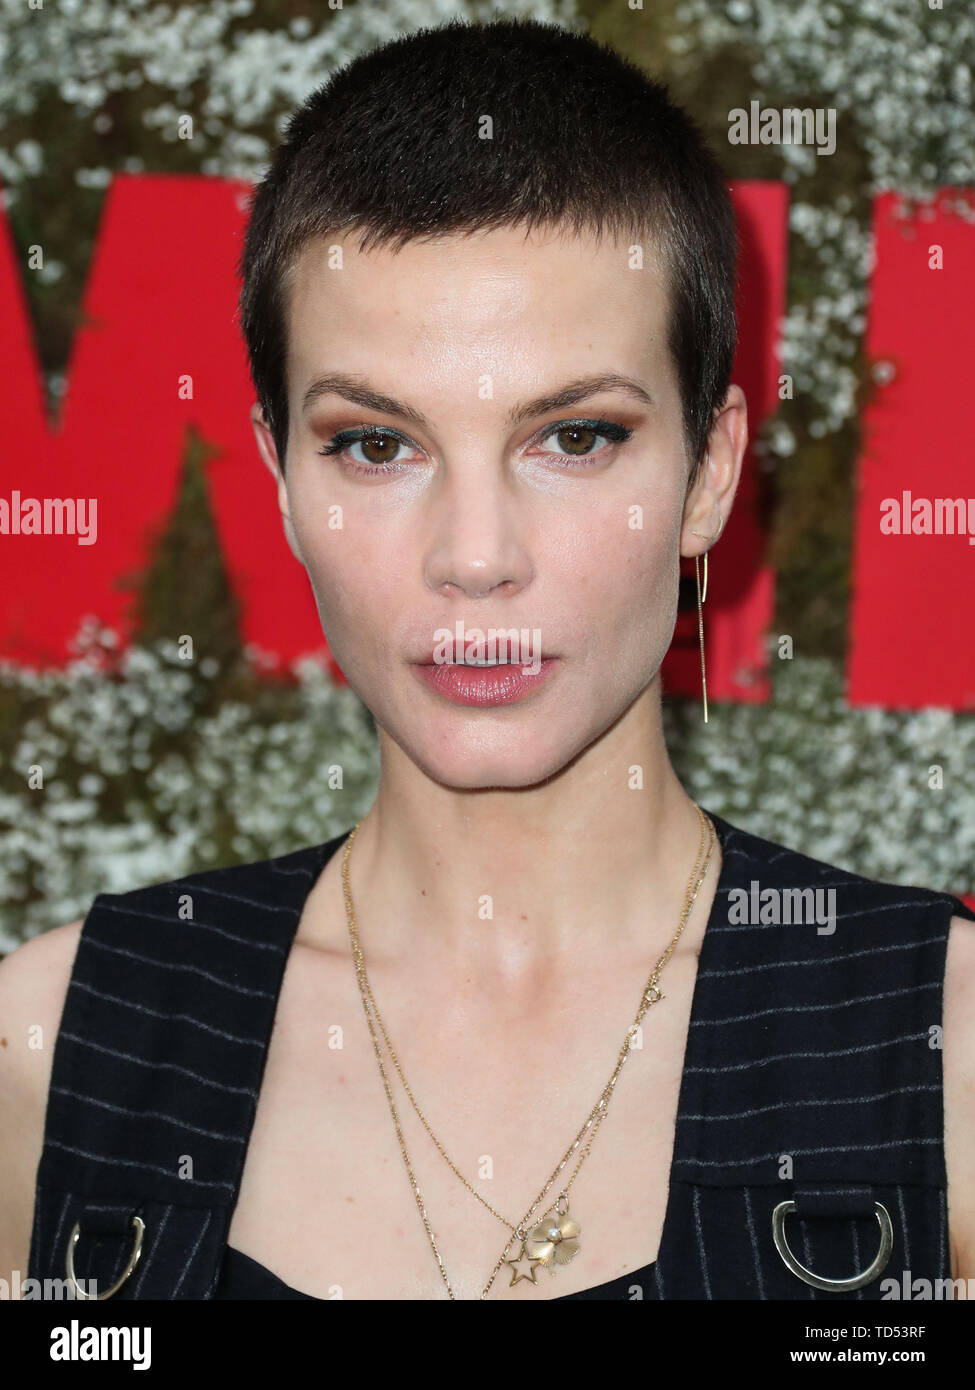 WEST HOLLYWOOD, LOS ANGELES, CALIFORNIA, USA - JUNE 11: Actress Sylvia Hoeks wearing Max Mara arrives at the InStyle Max Mara Women In Film Celebration held at Chateau Marmont on June 11, 2019 in West Hollywood, Los Angeles, California, USA. (Photo by Xavier Collin/Image Press Agency) Stock Photo